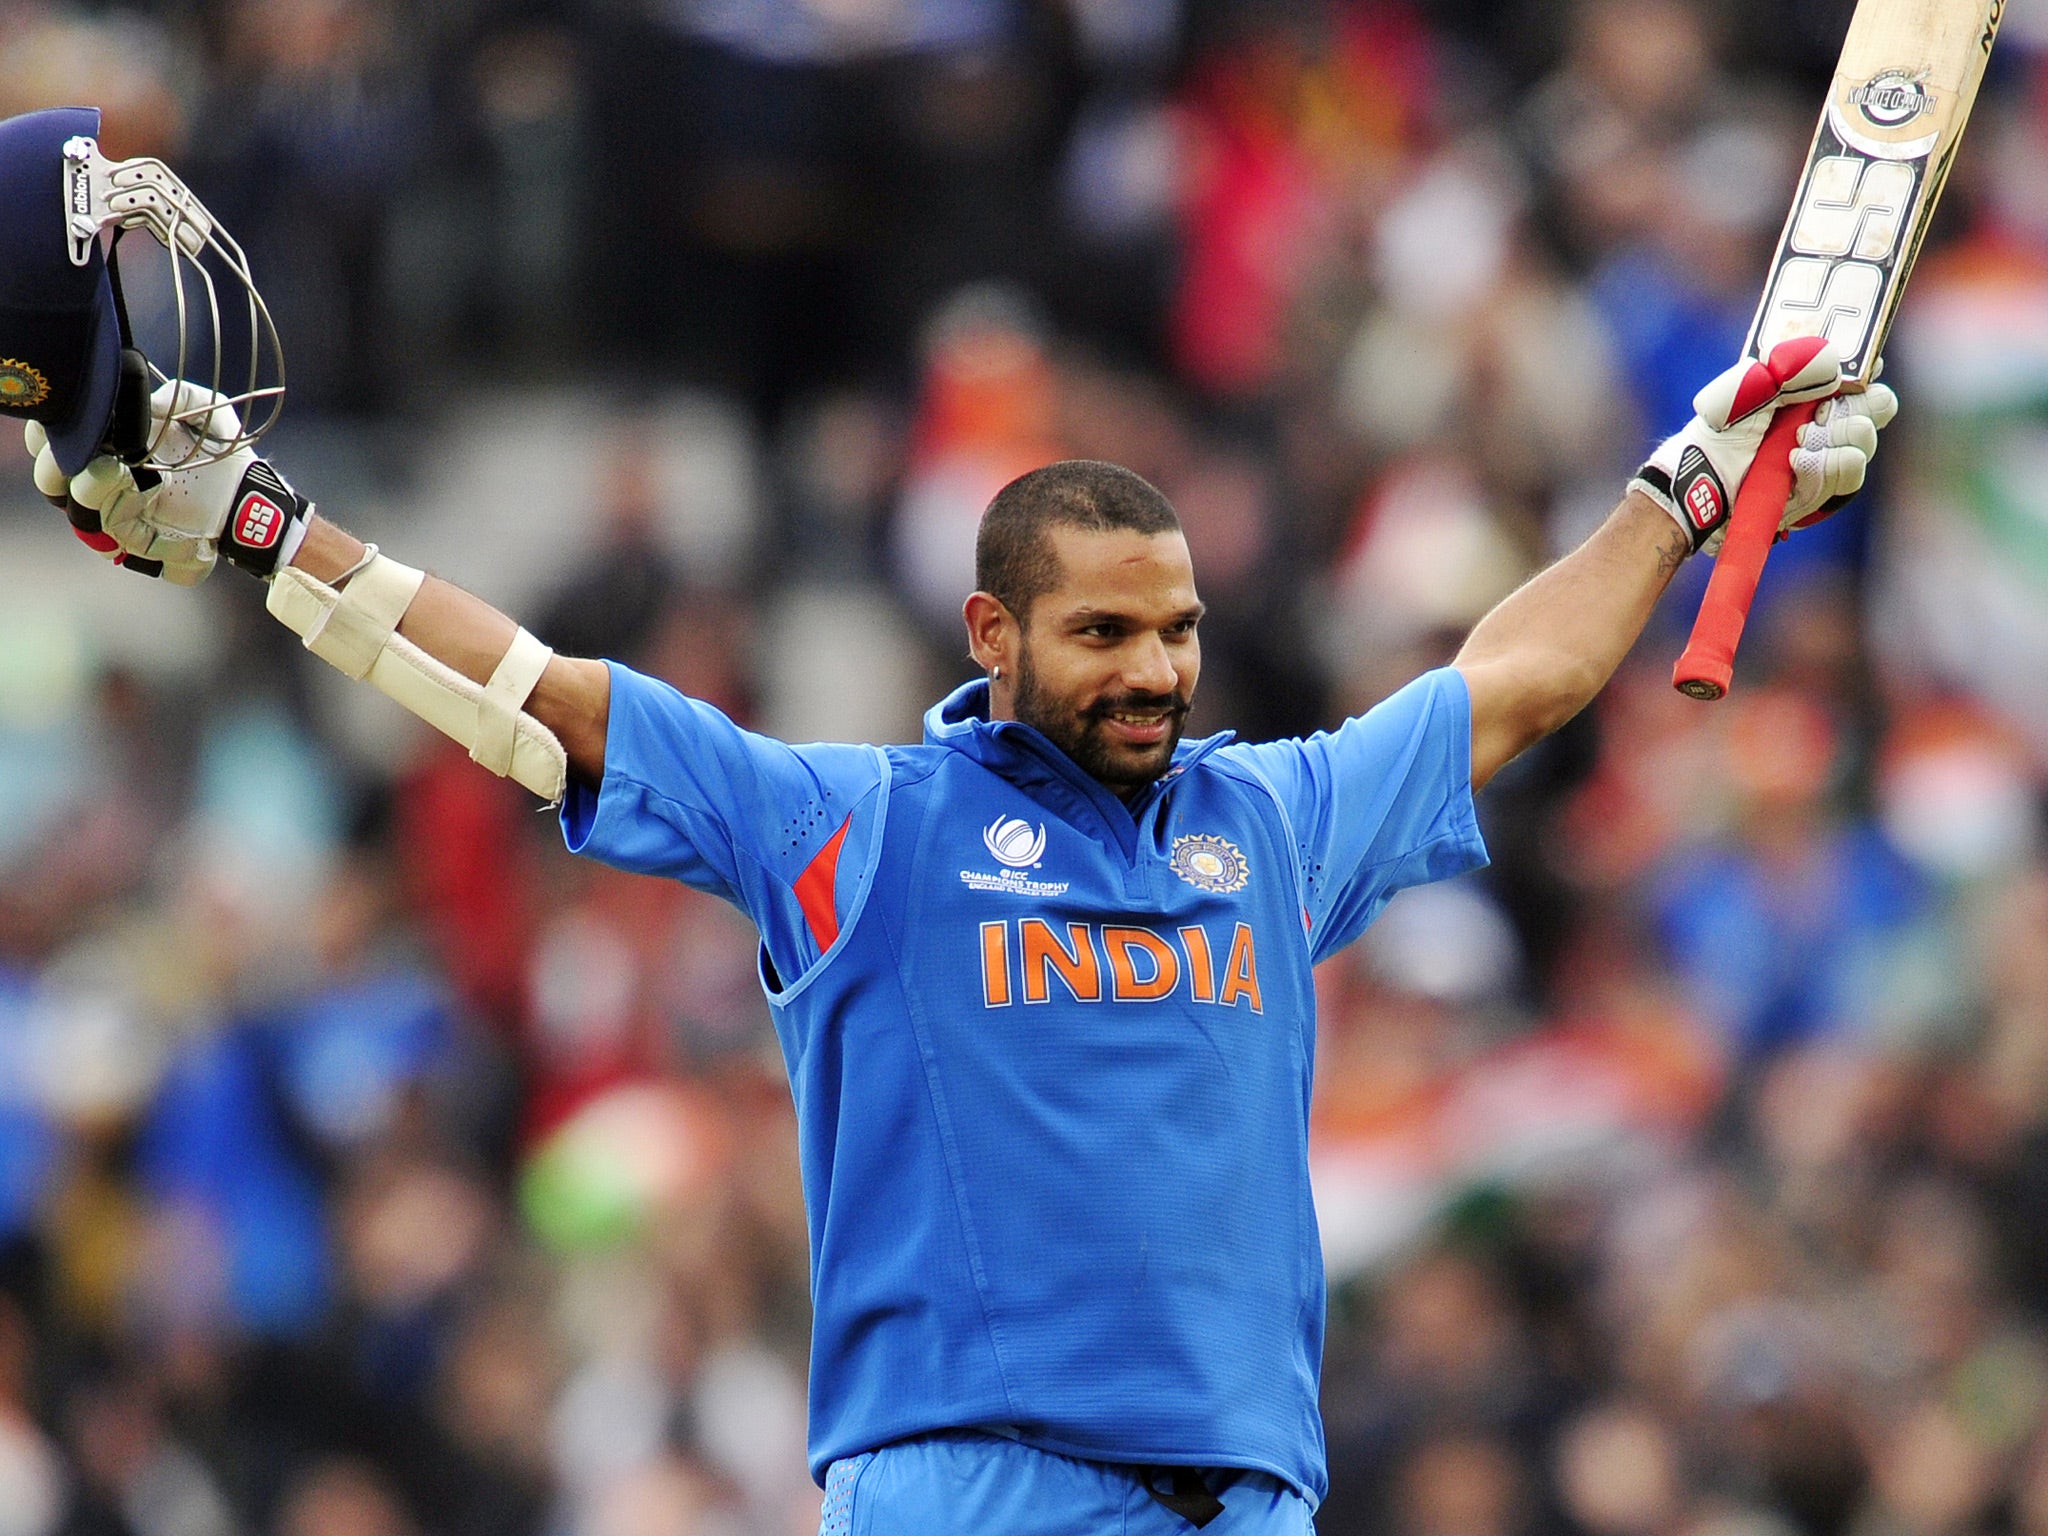 India's Shikhar Dhawan celebrates his century (100 Runs) during the 2013 ICC Champions Trophy One Day International (ODI) cricket match between India and West Indies at The Oval in London